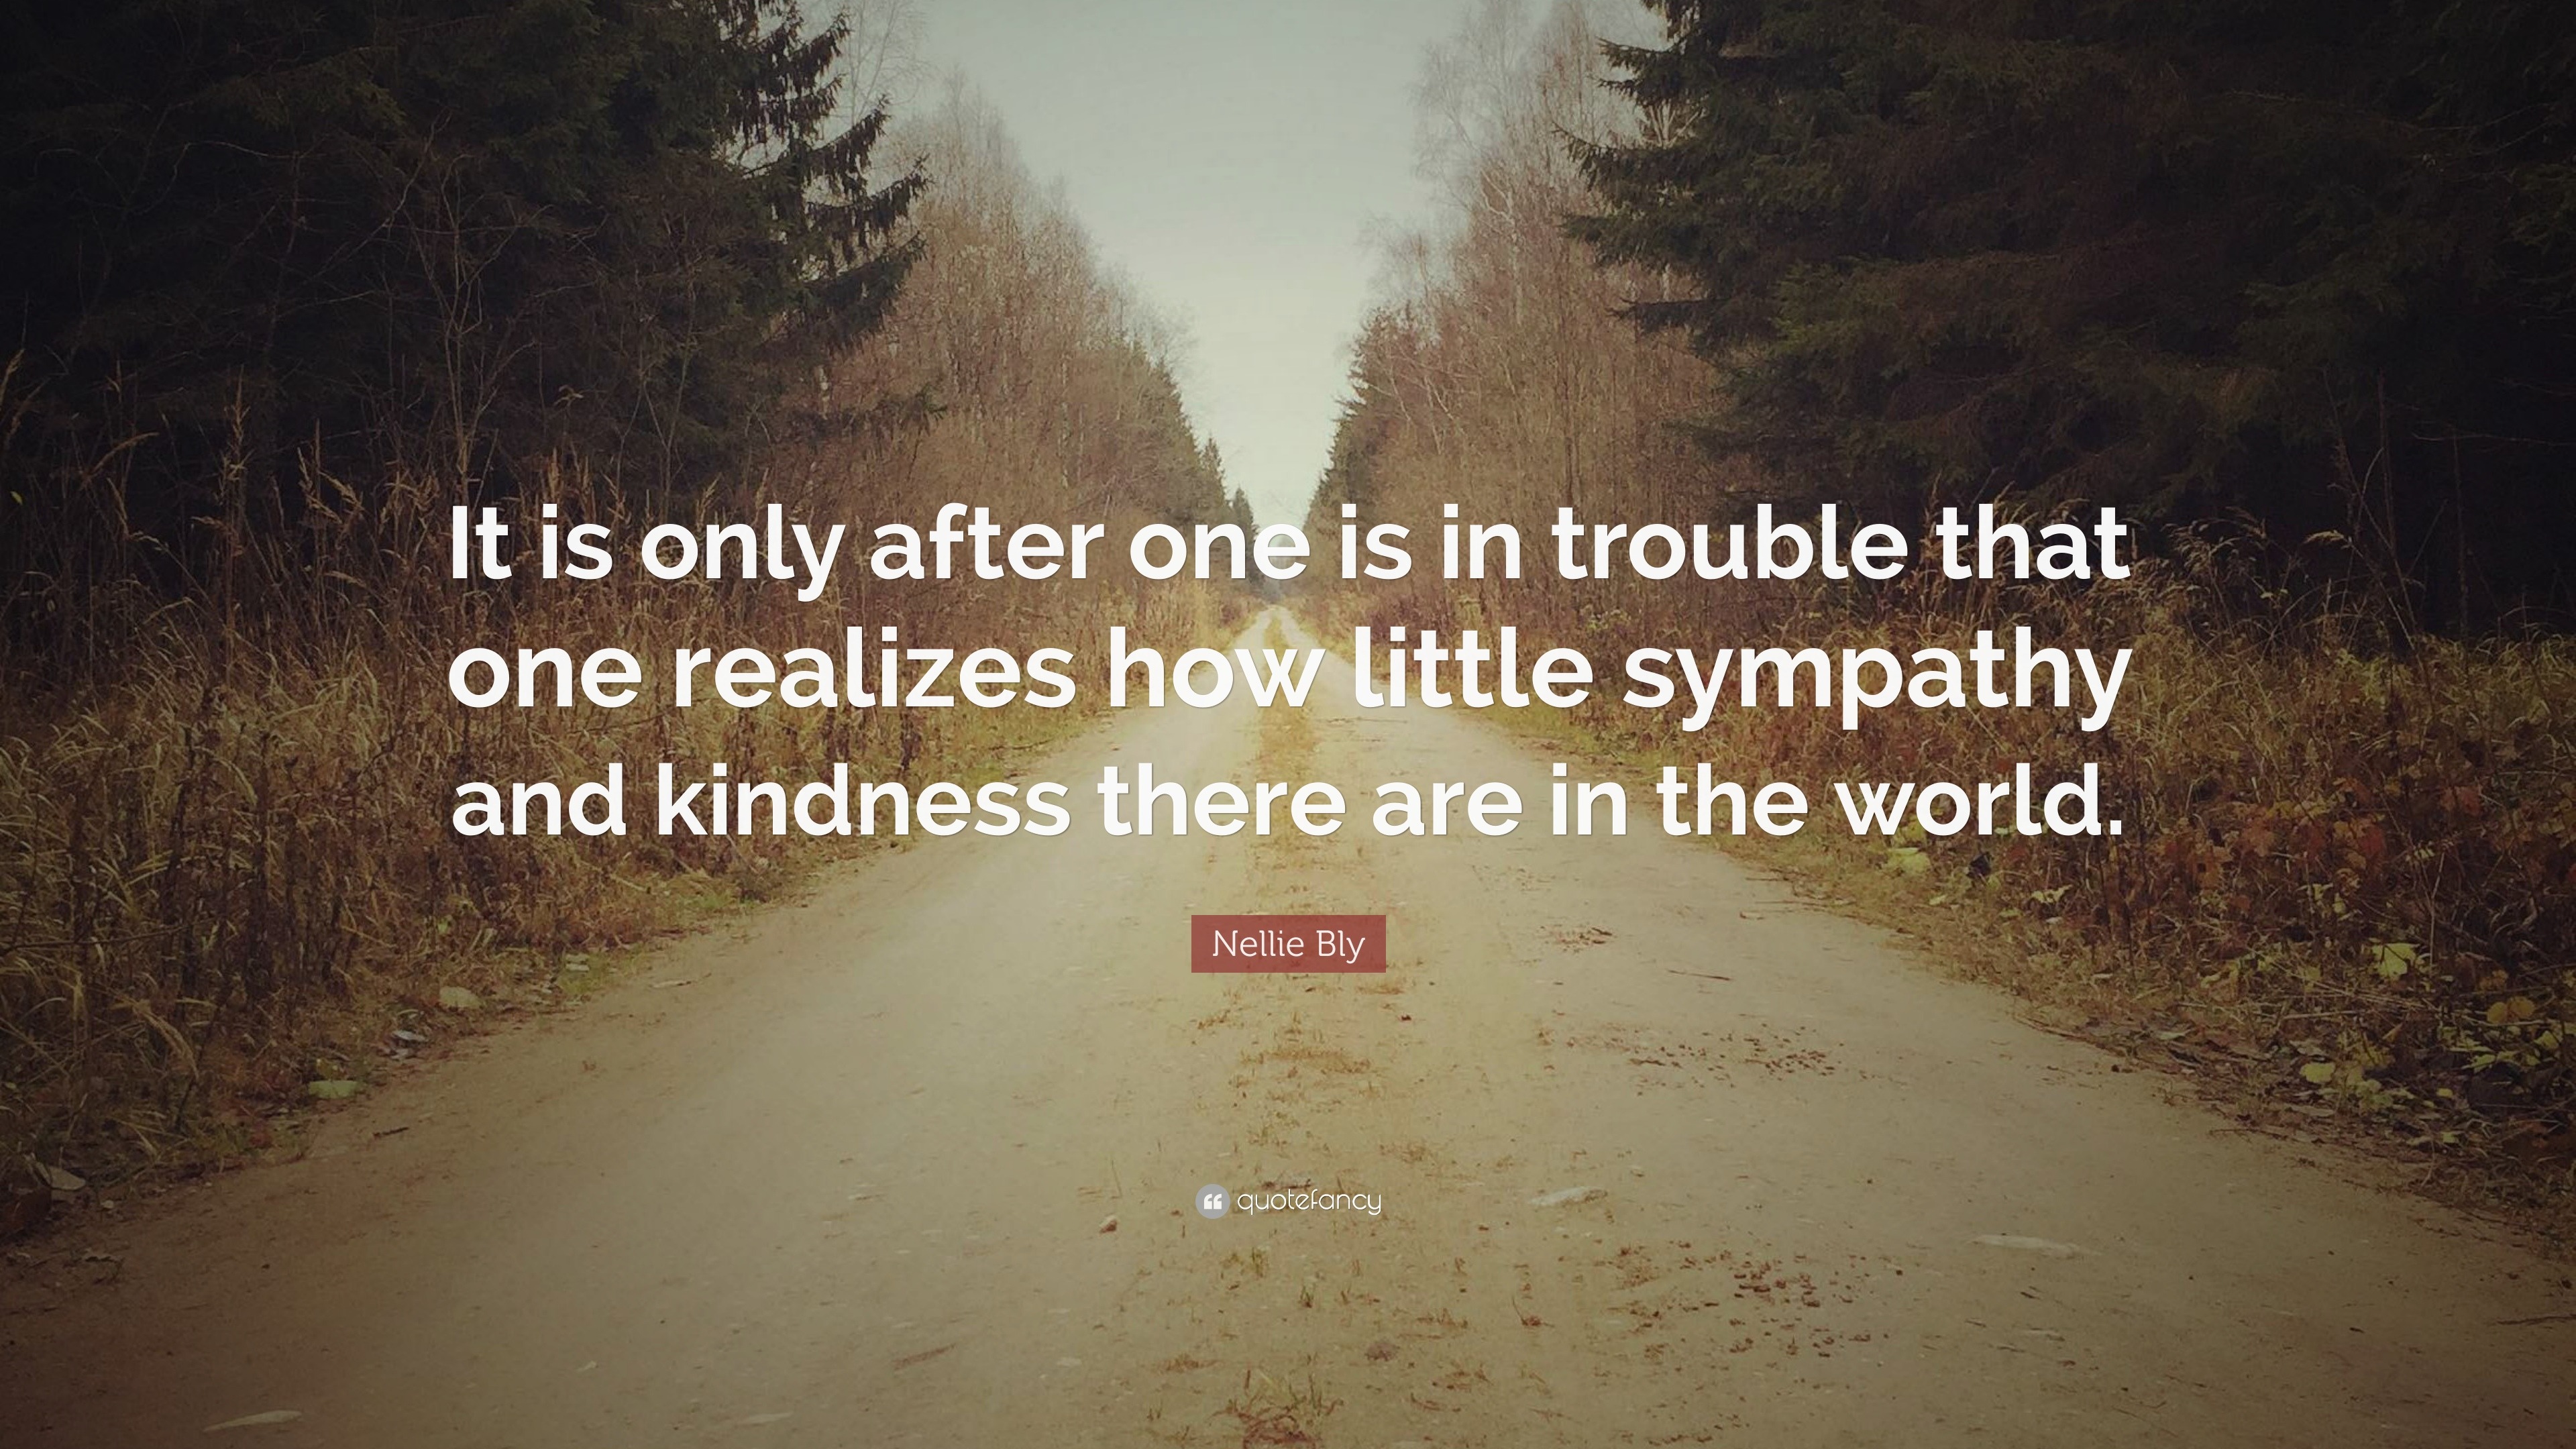 Nellie Bly Quote: “It is only after one is in trouble that one realizes ...